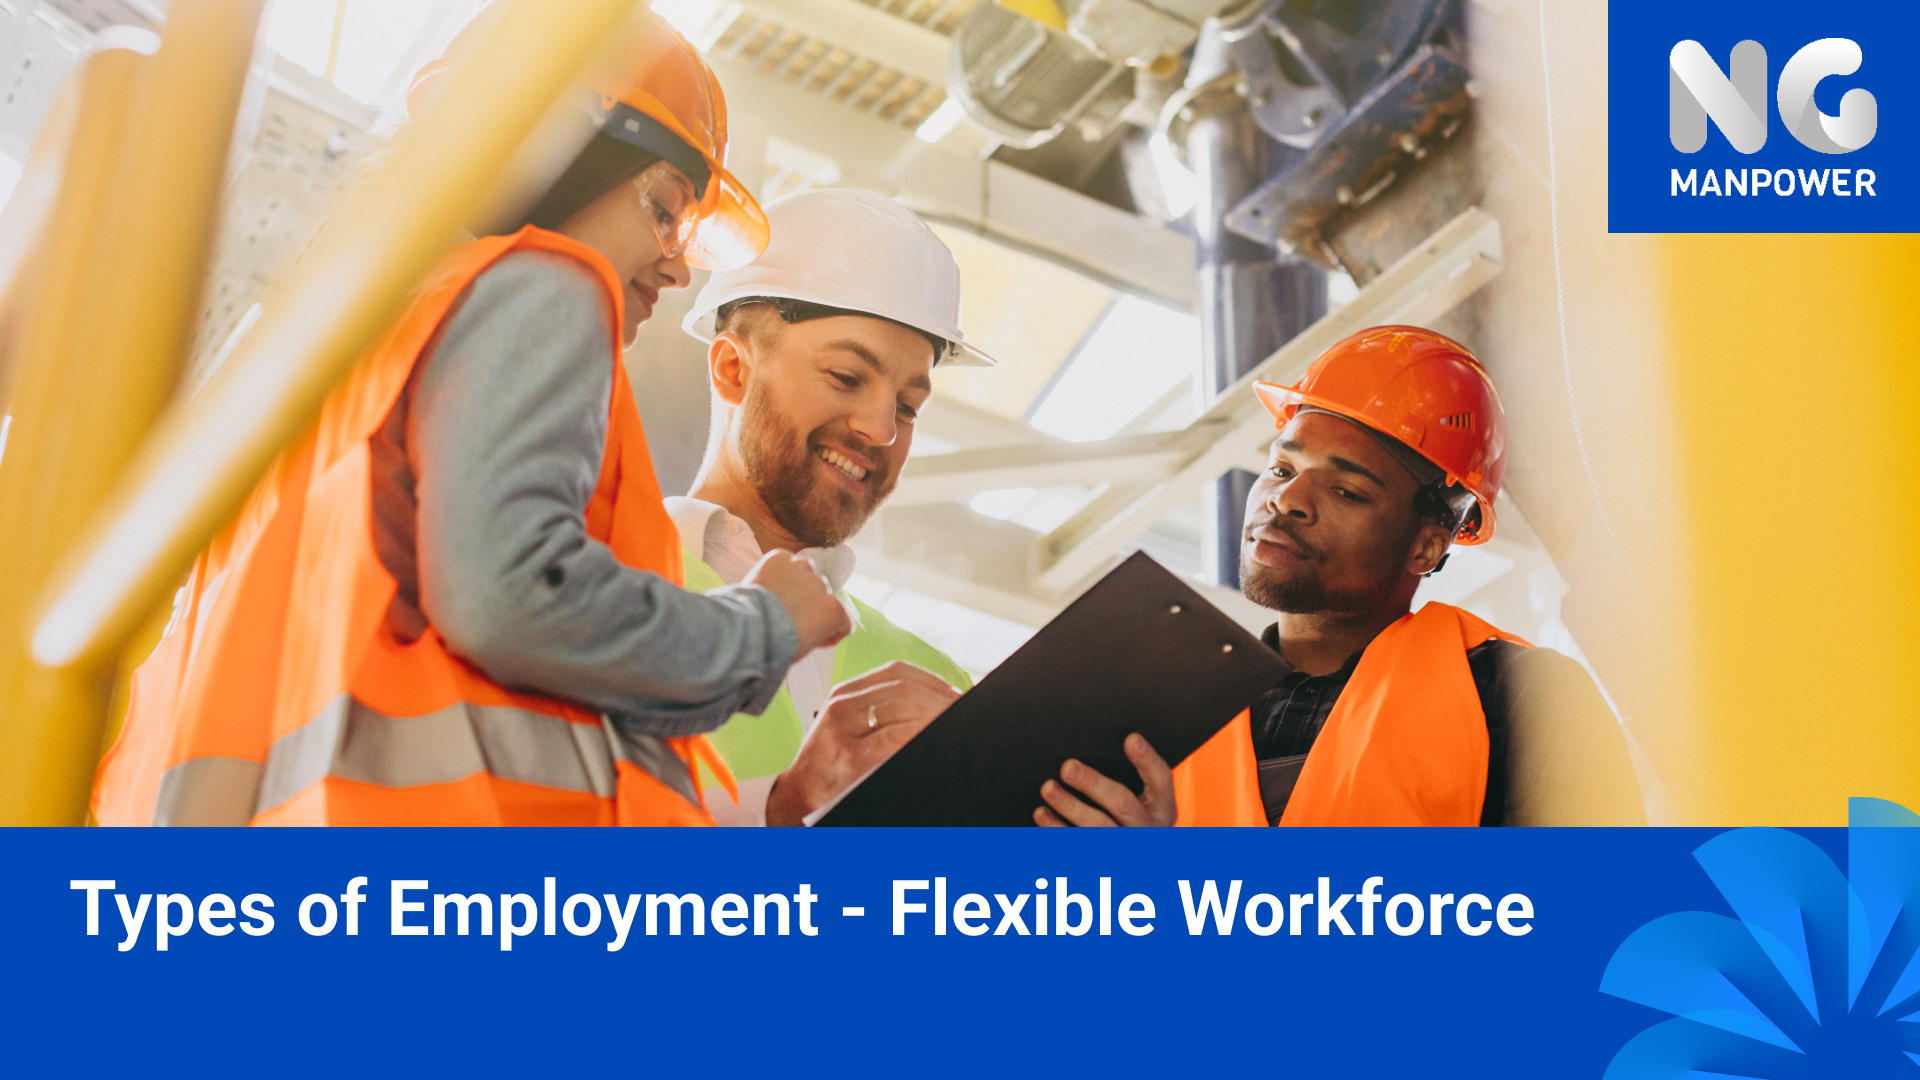 Types of Employment - Flexibility in the Workforce